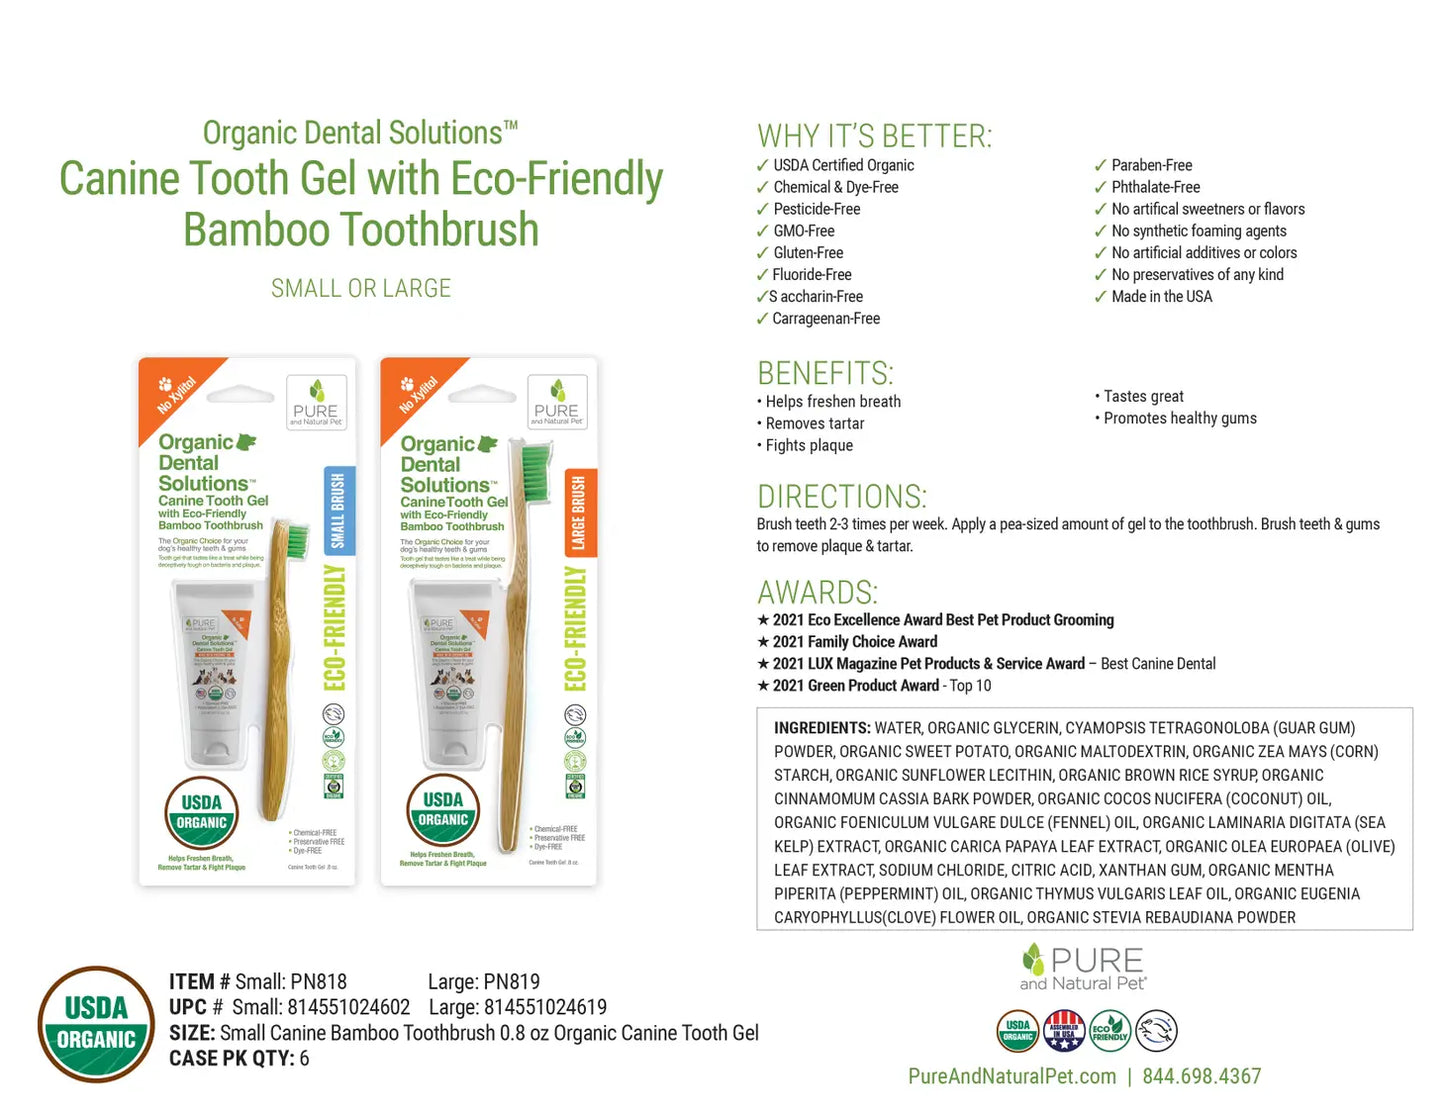 Pure and Natural Pet Organic Dental Solutions